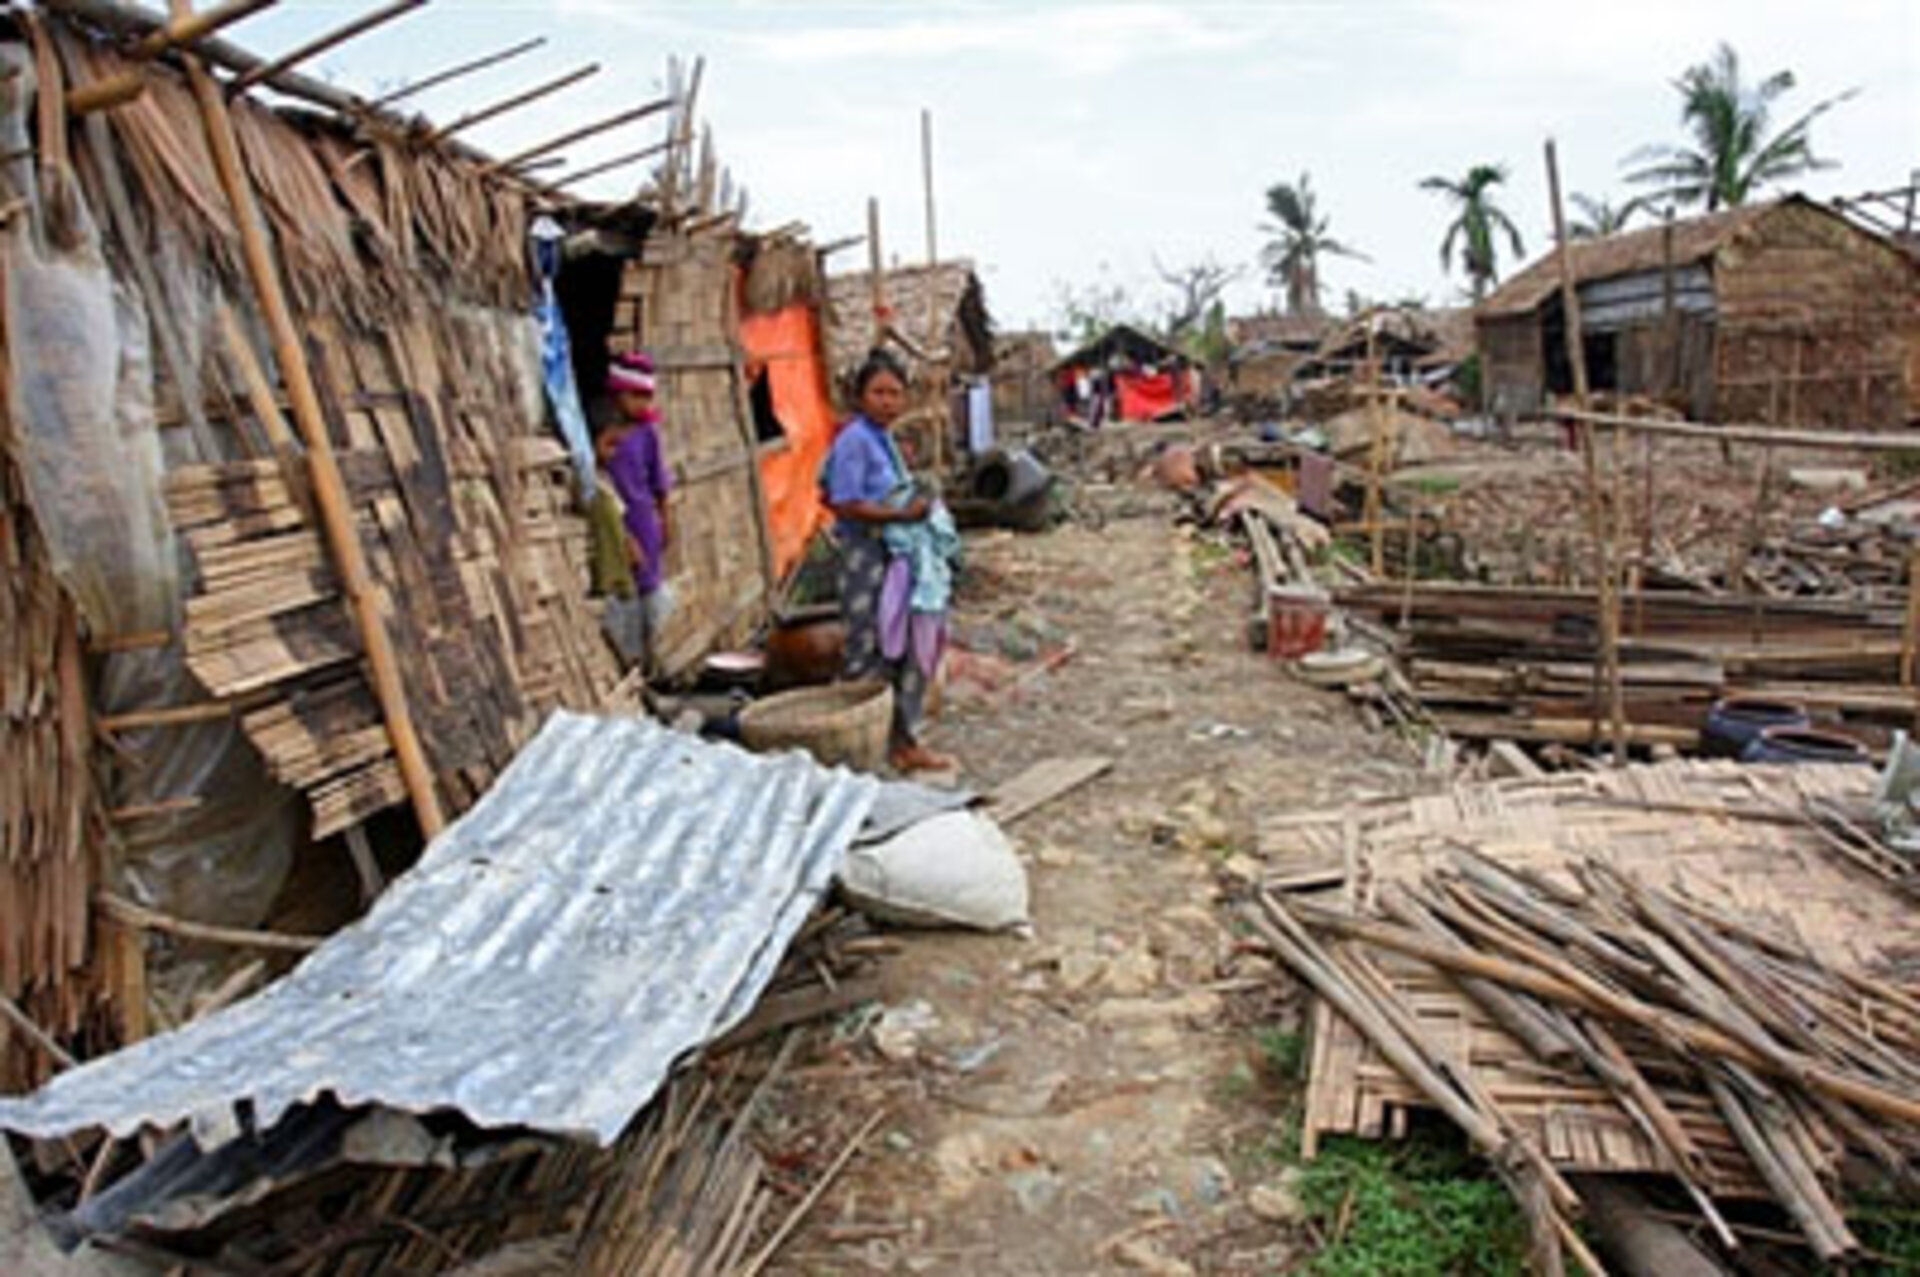 The town of Labutta after Cyclone Nargis devastated Myanmar's Irrawaddy Delta